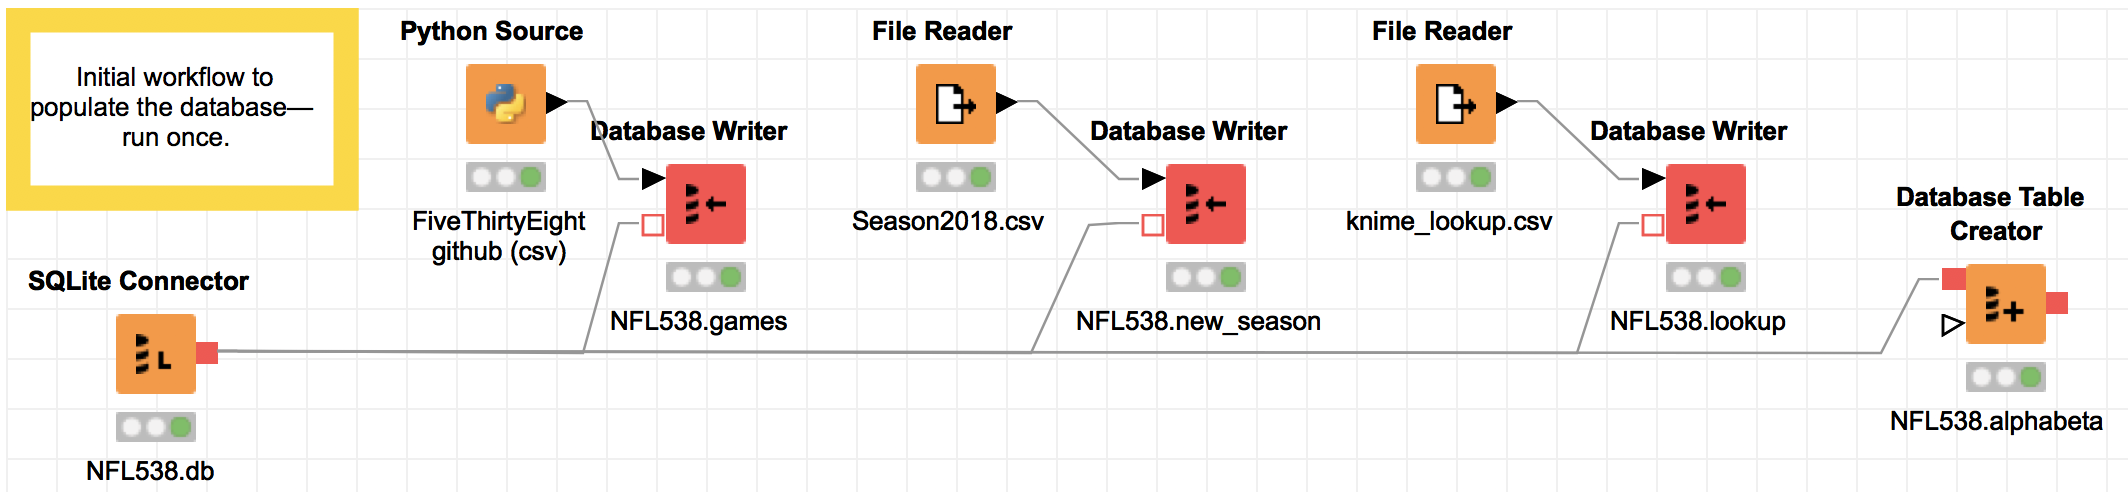 There is a text label that says 'Initial workflow to populate the database. To be run once.' The image also contains eight nodes: a SQLite connector to the football database NFL538.db, and three pairs of nodes in which the first node gets data from the internet or a local file and the second node loads the file as a separate new table in the database. At the end is one last block that creates the table that will store the running alpha, beta values that keep track of wins and losses (reverted to the mean each season).